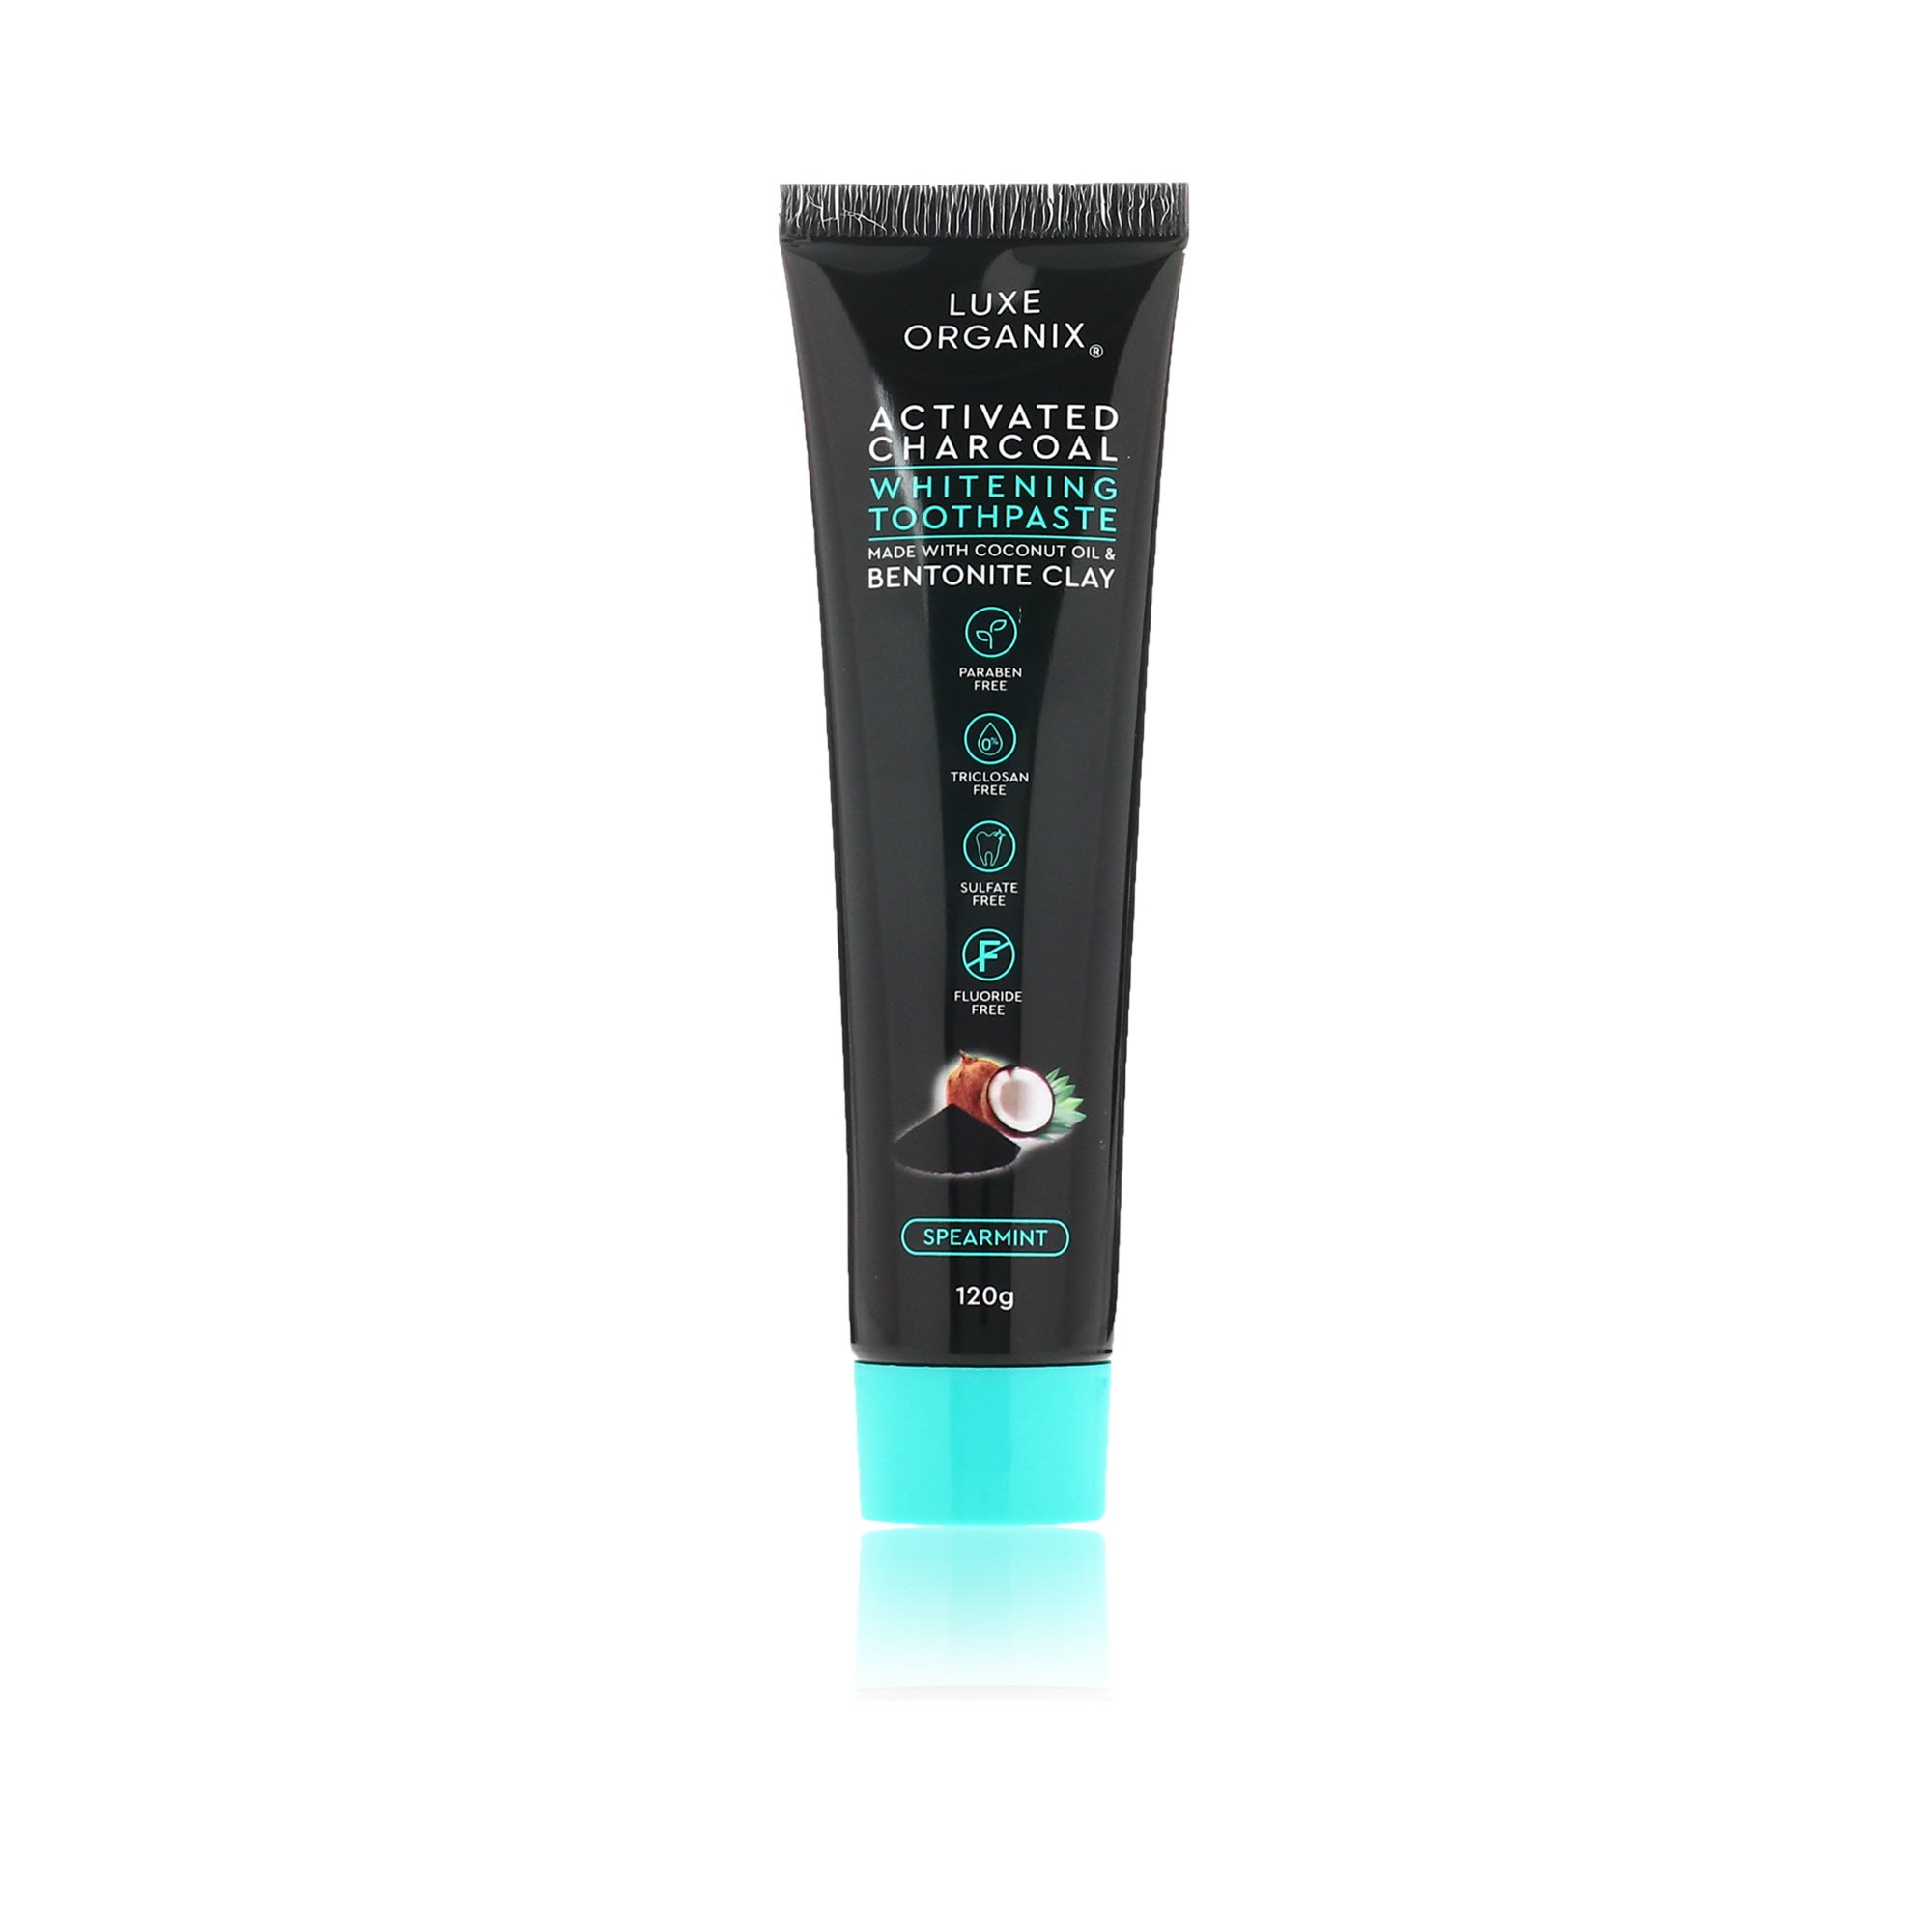 Luxe Organix Activated Charcoal Whitening Toothpaste_1